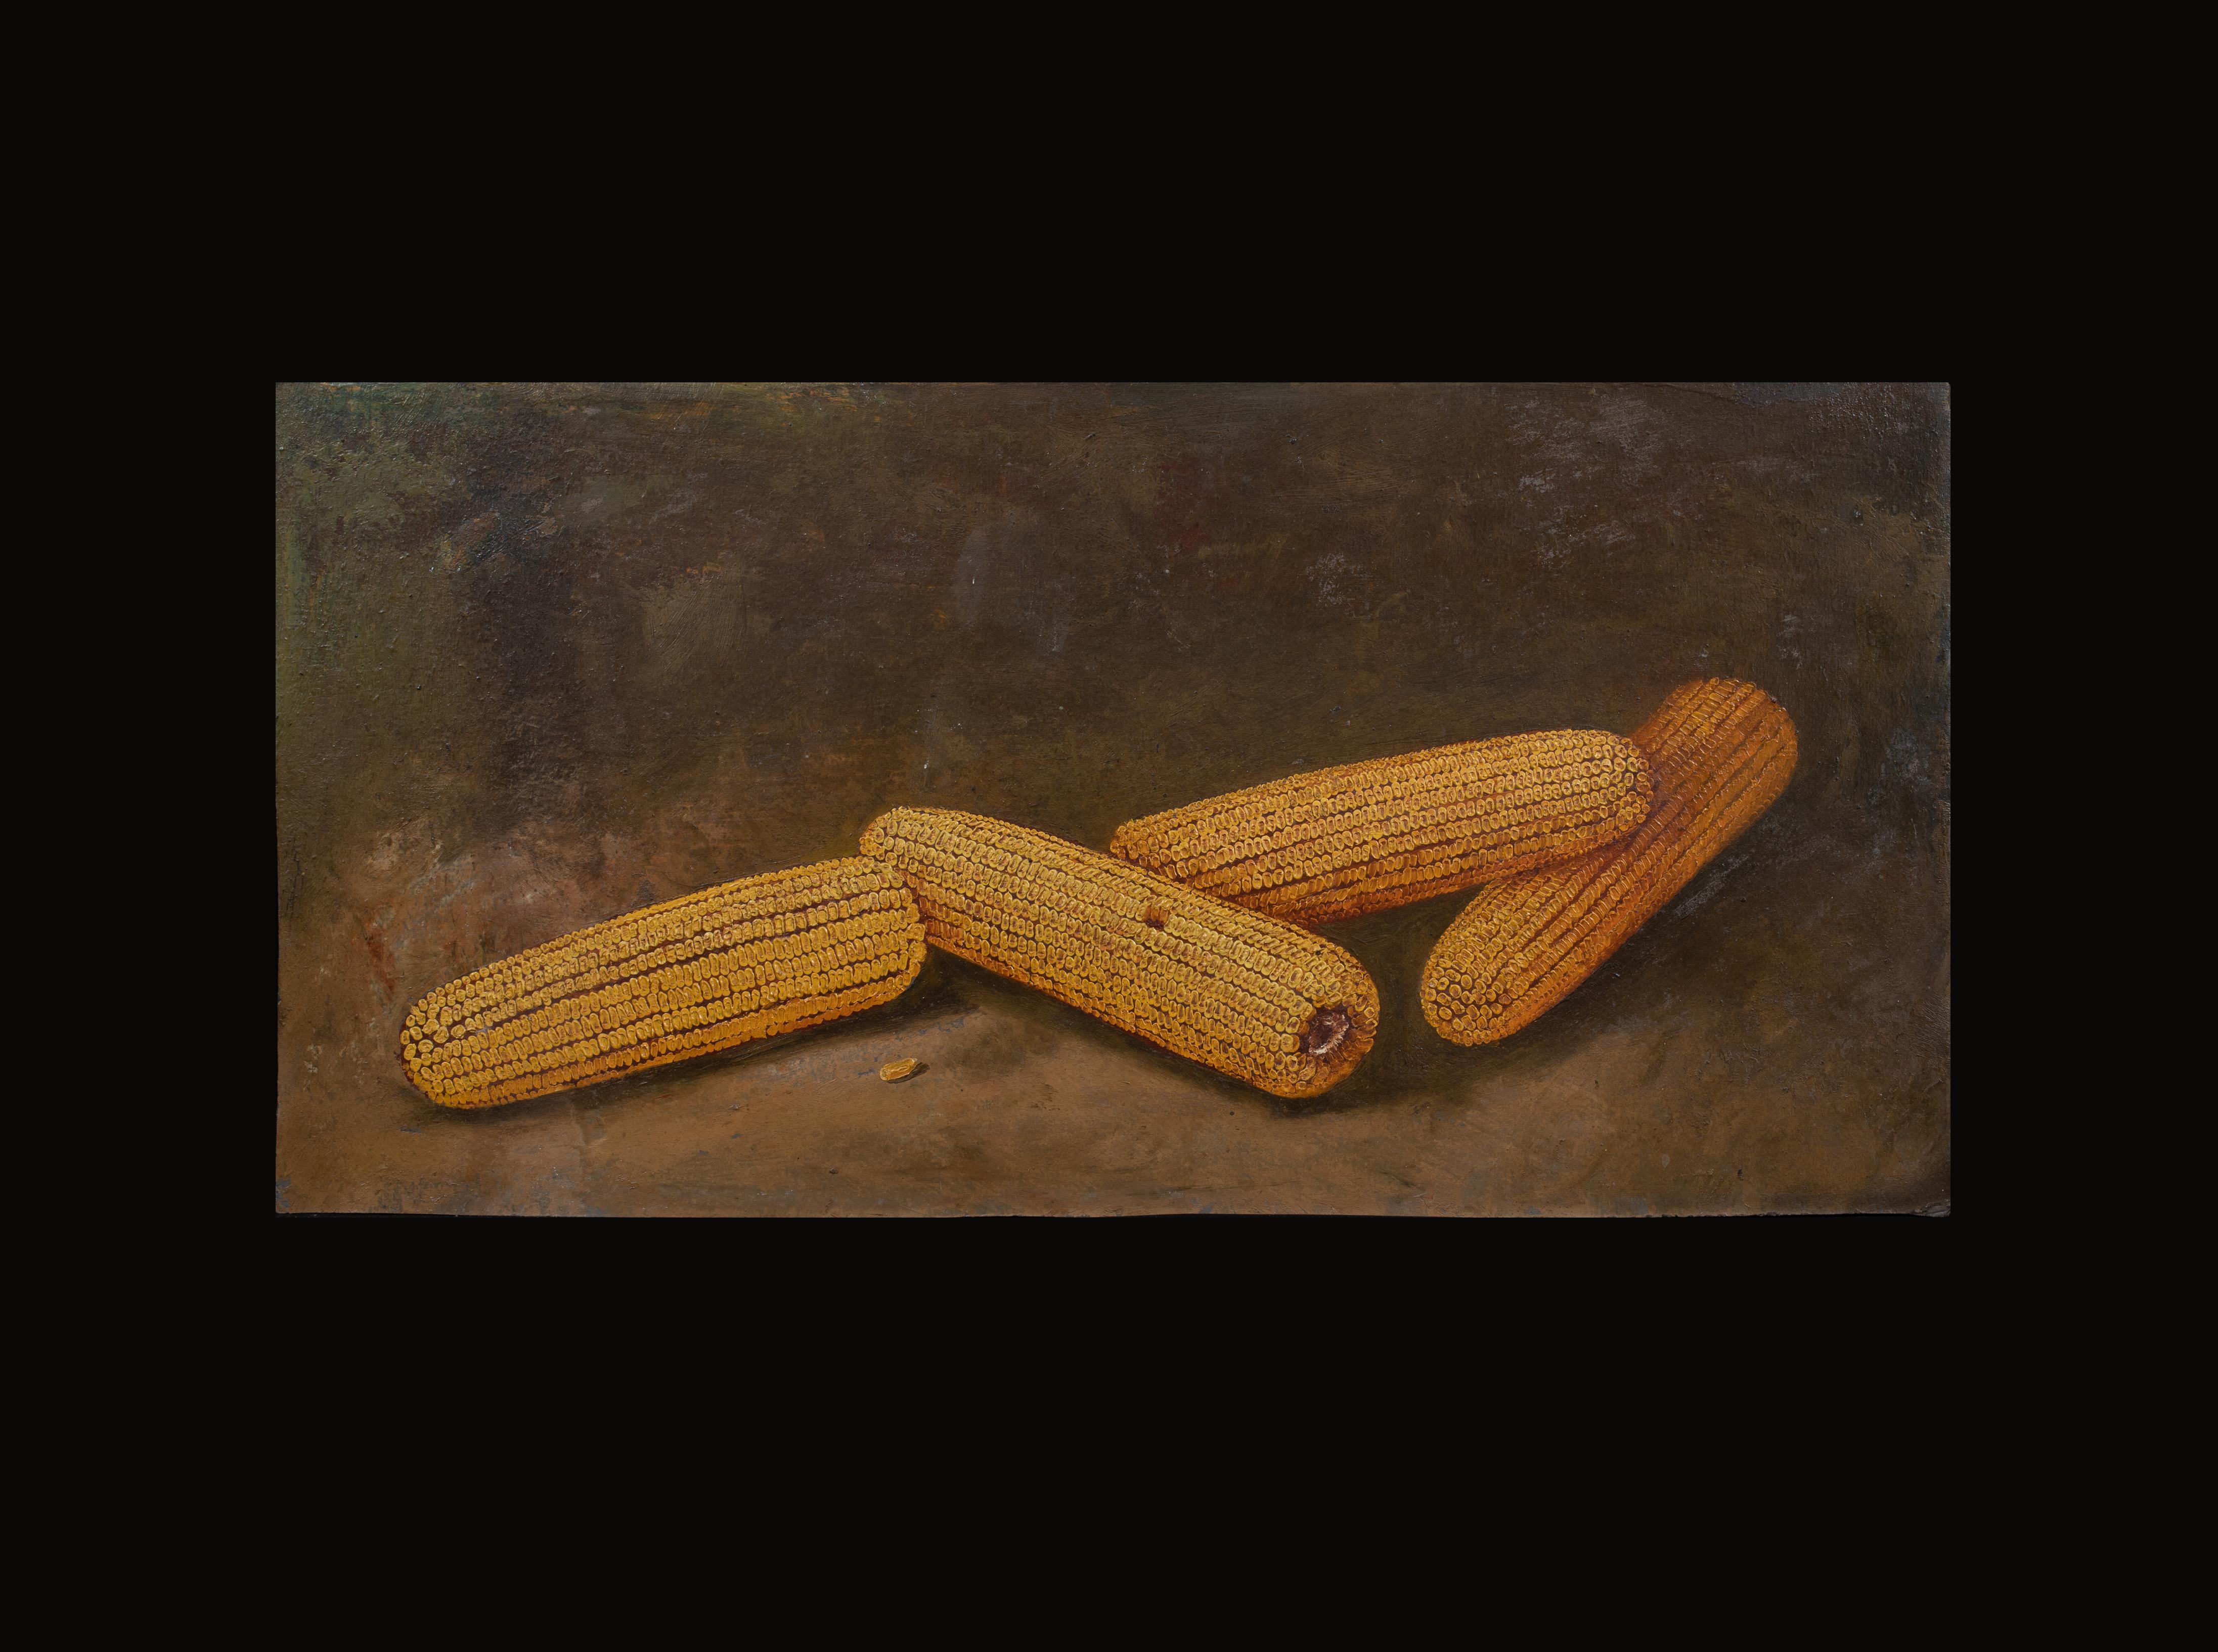 Study of Corn On The Cob, 19th Century - Painting by alfred montgomery